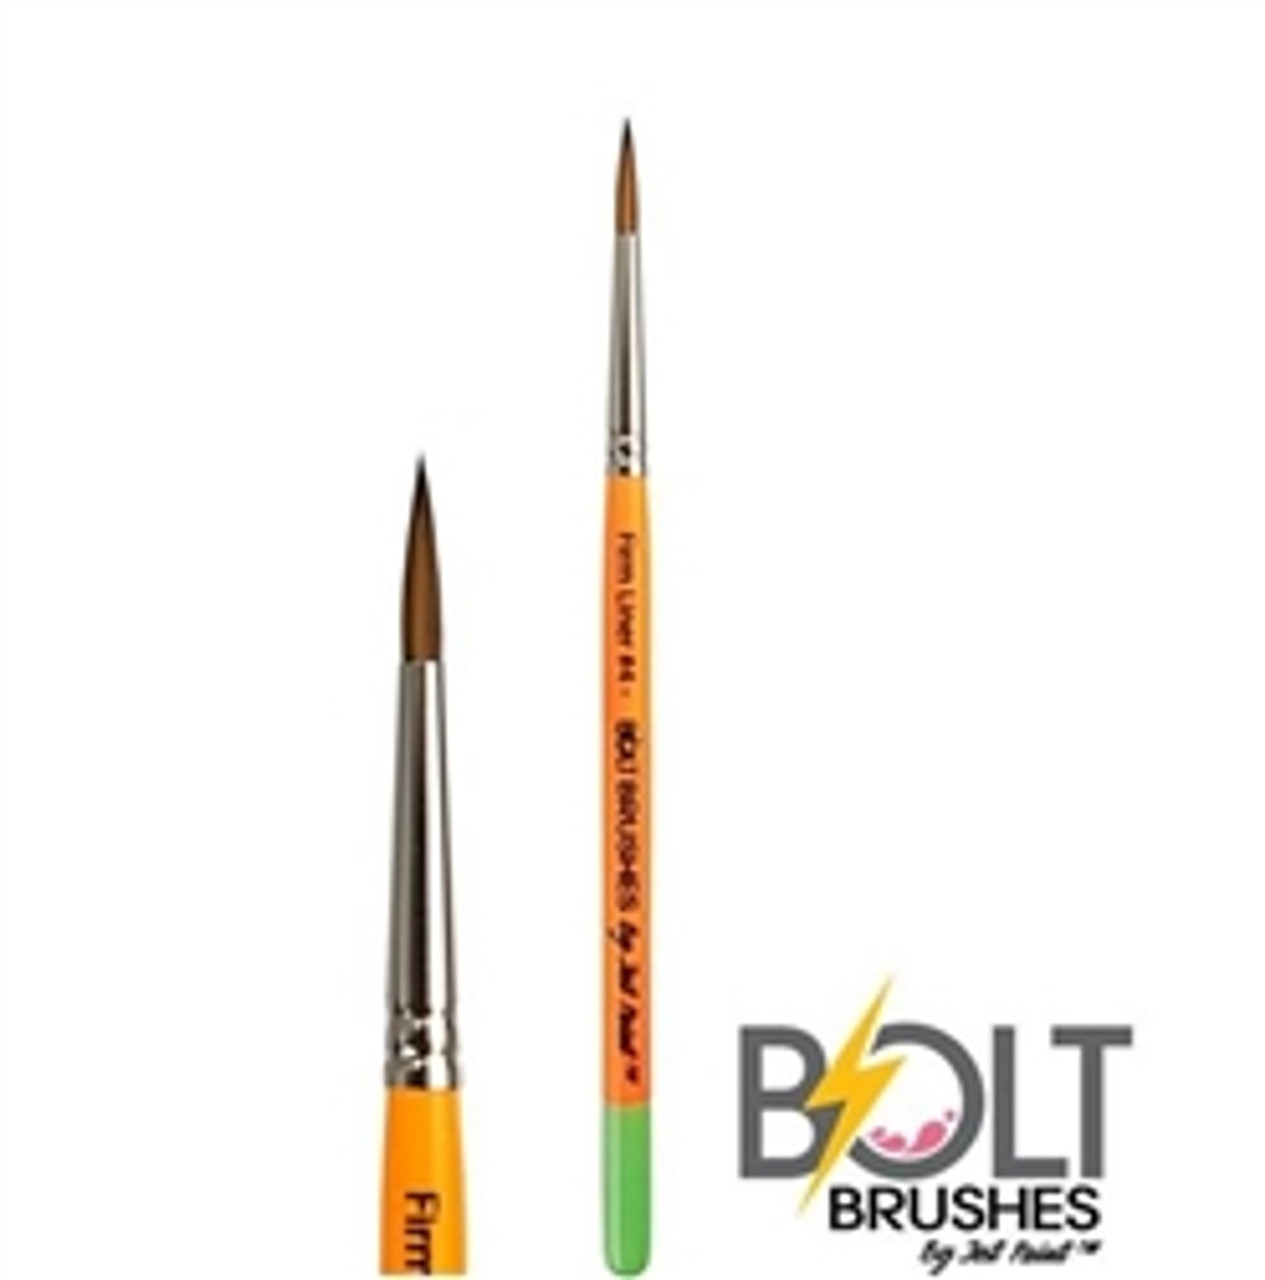 BOLT Face Painting Brush - Firm Liner #4